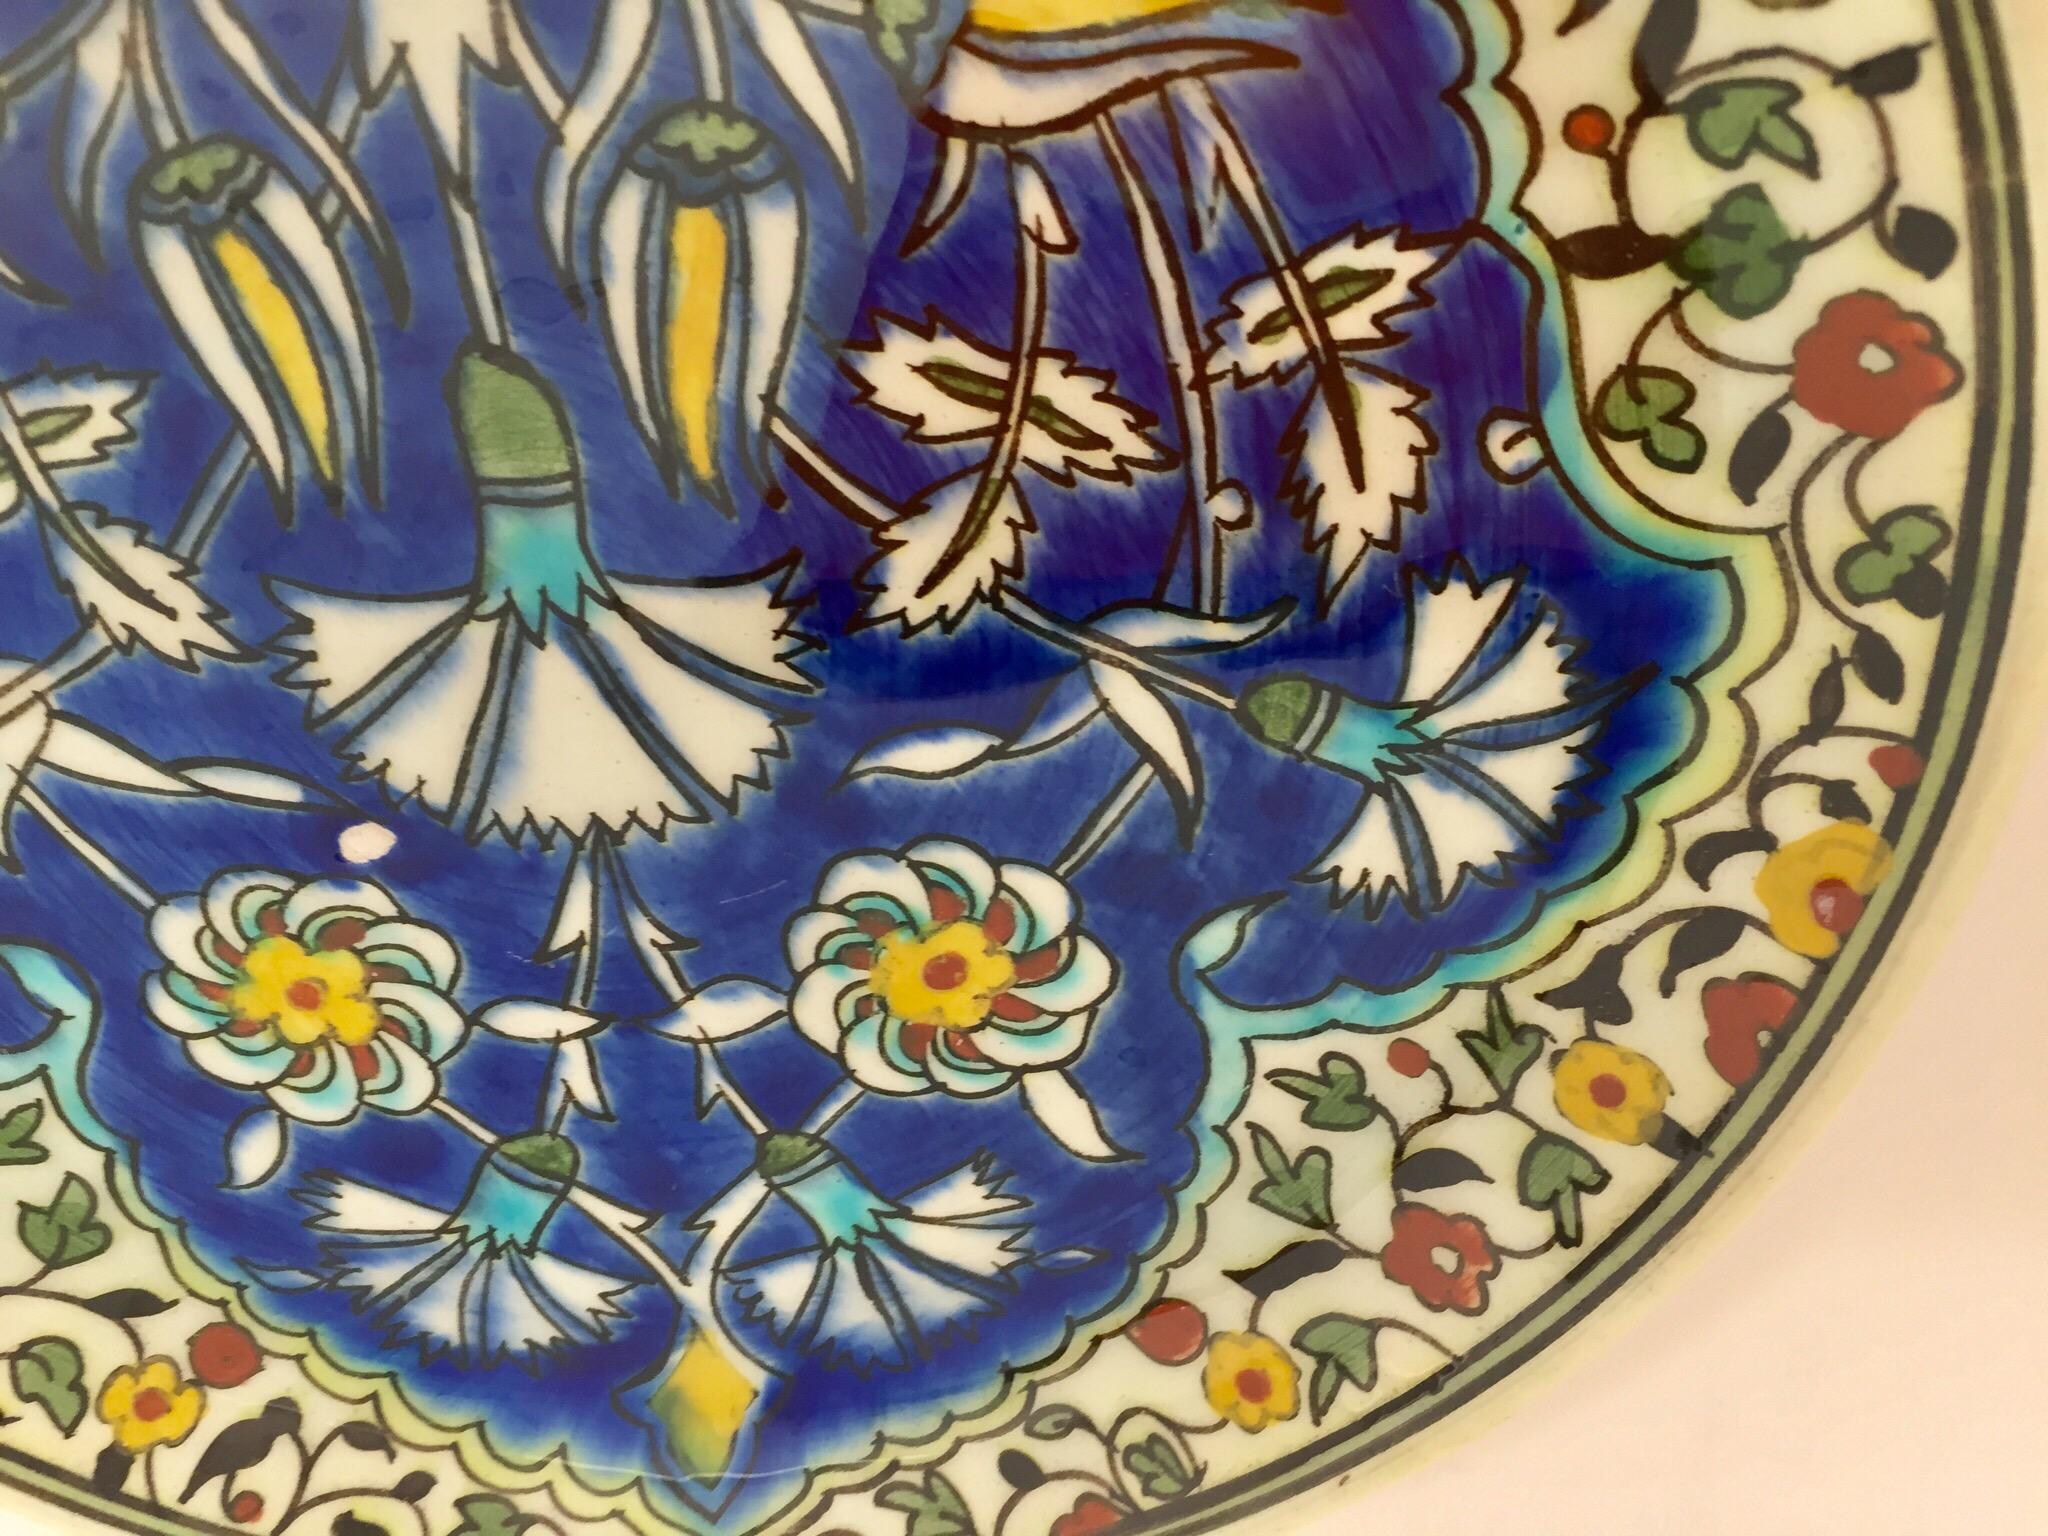 Polychrome hand painted and handcrafted ceramic wall decorative plate with polychrome floral design.
This is an intricately, hand painted plate that was made in Turkey.
Turkey is famous for its kiln products, such as tiles and pottery, which are